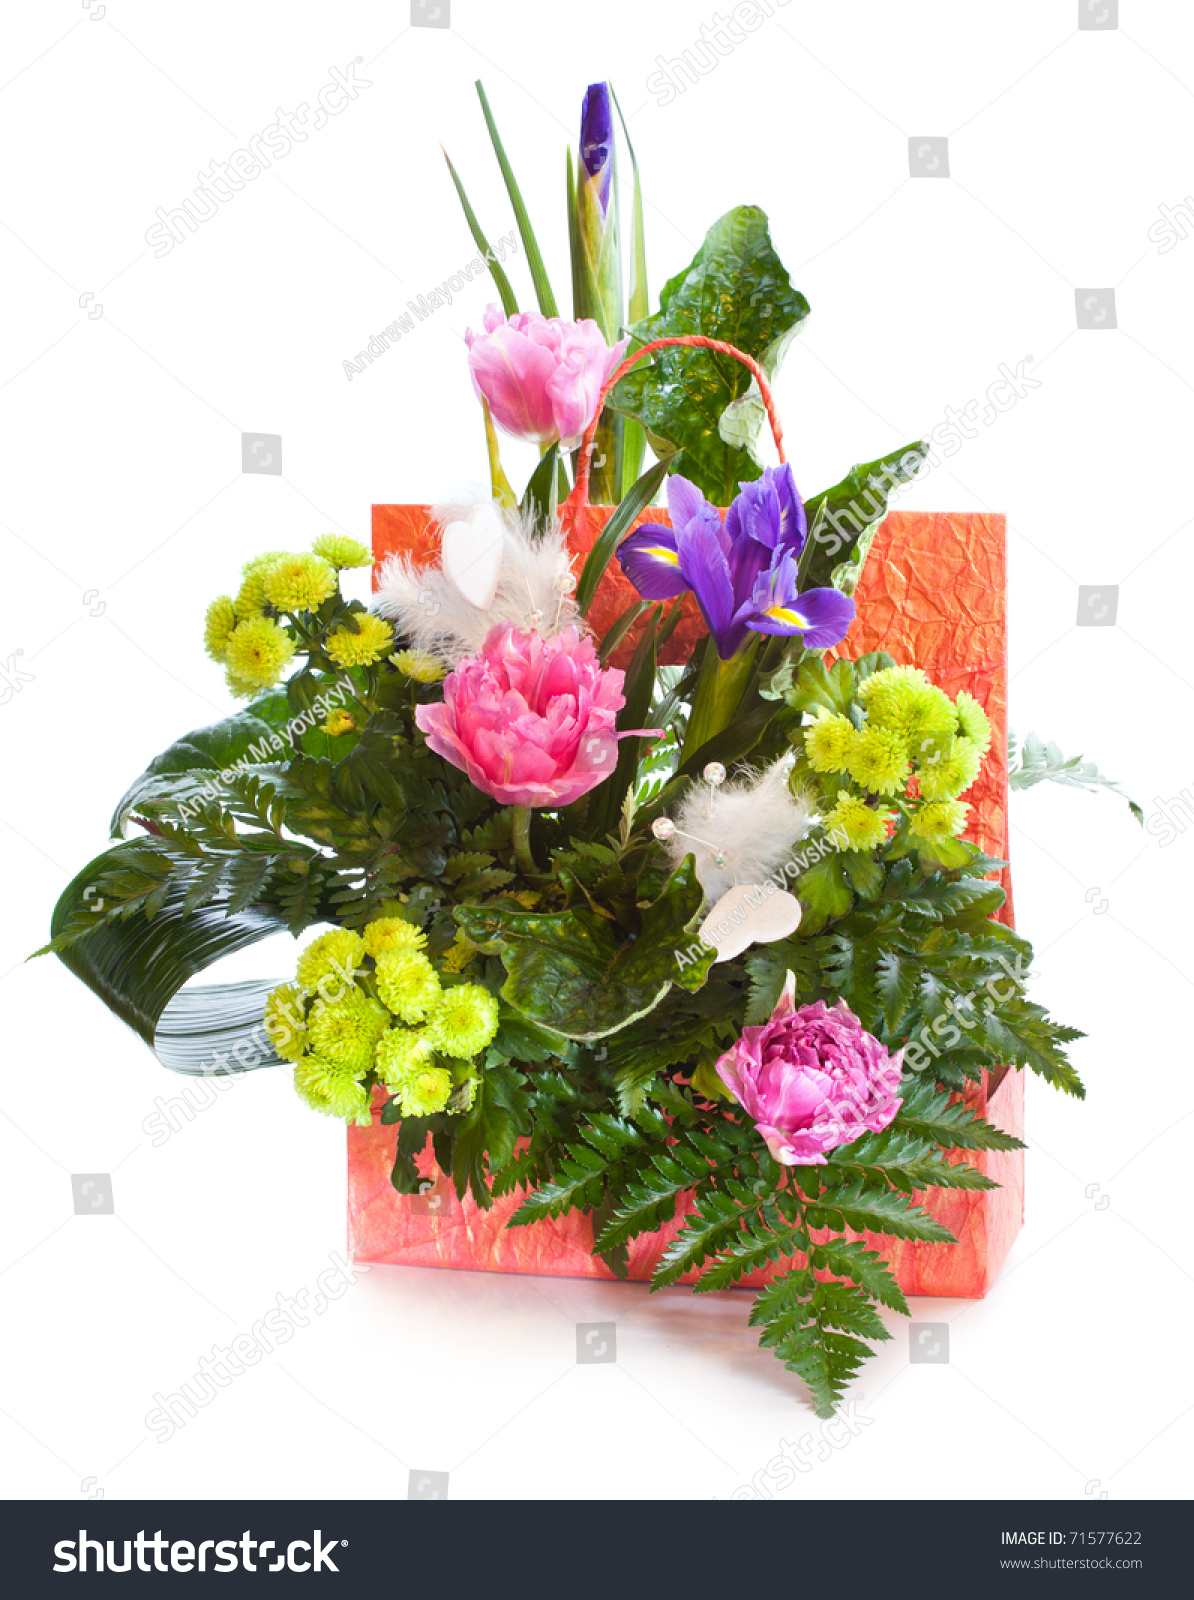 Bright Flower Bouquet Isolated Over White Background Stock Photo